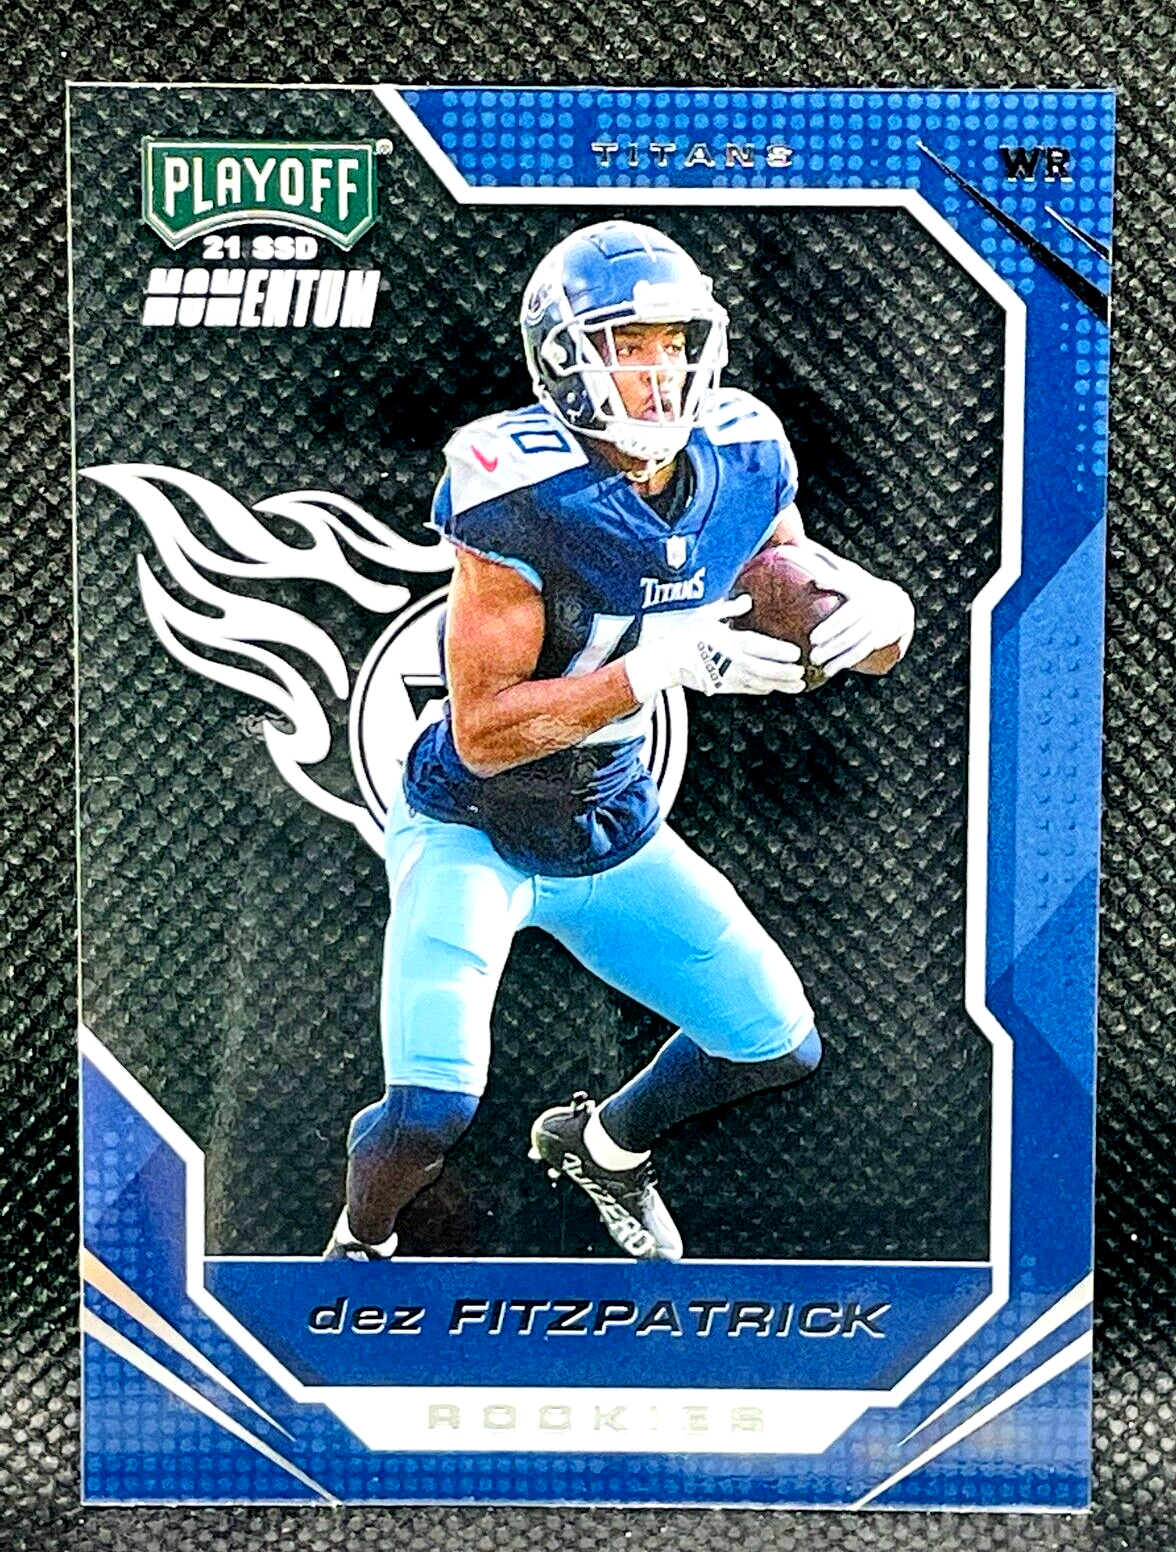 2021 Panini Playoff Momentum - DEZ FITZPATRICK RC - Acetate Rookie Card - TITANS. rookie card picture